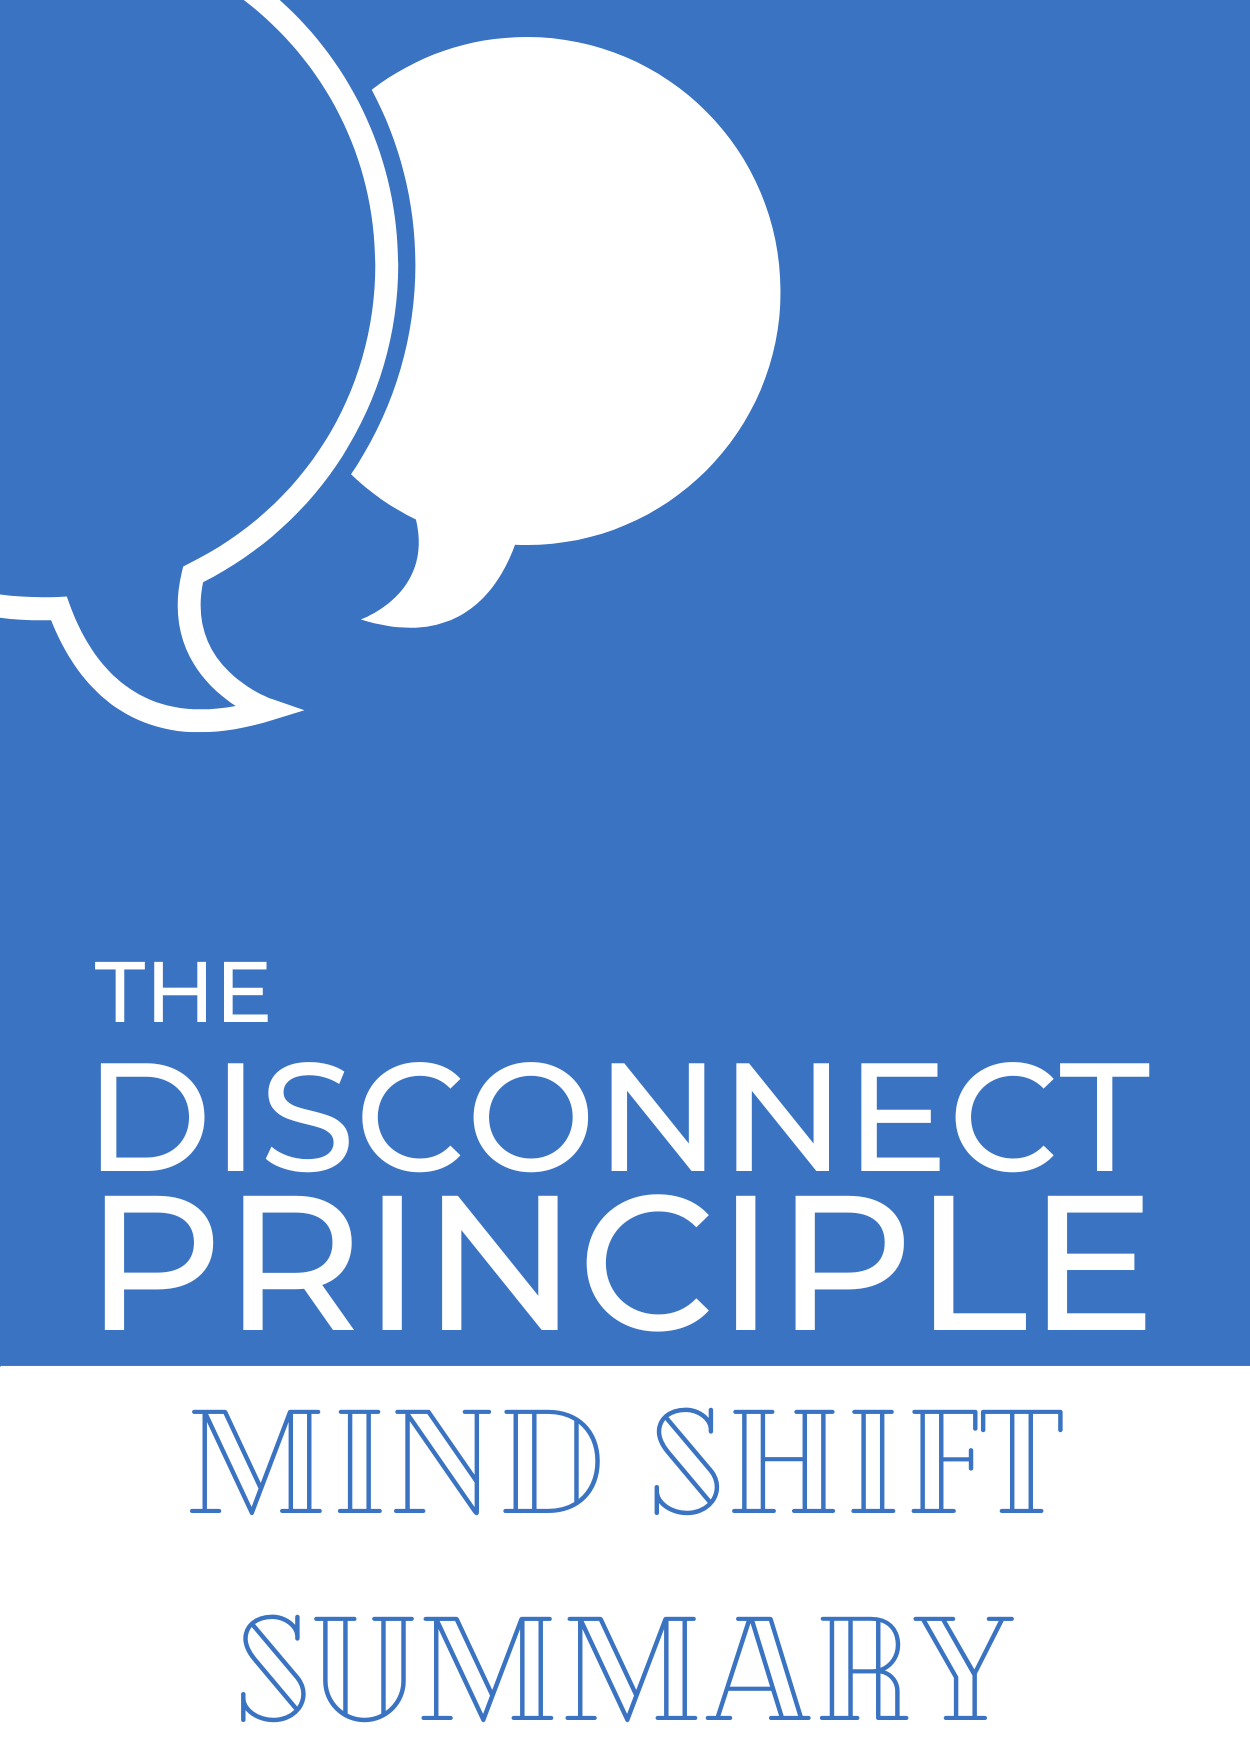 The Disconnect Principle Mind Shift Summary